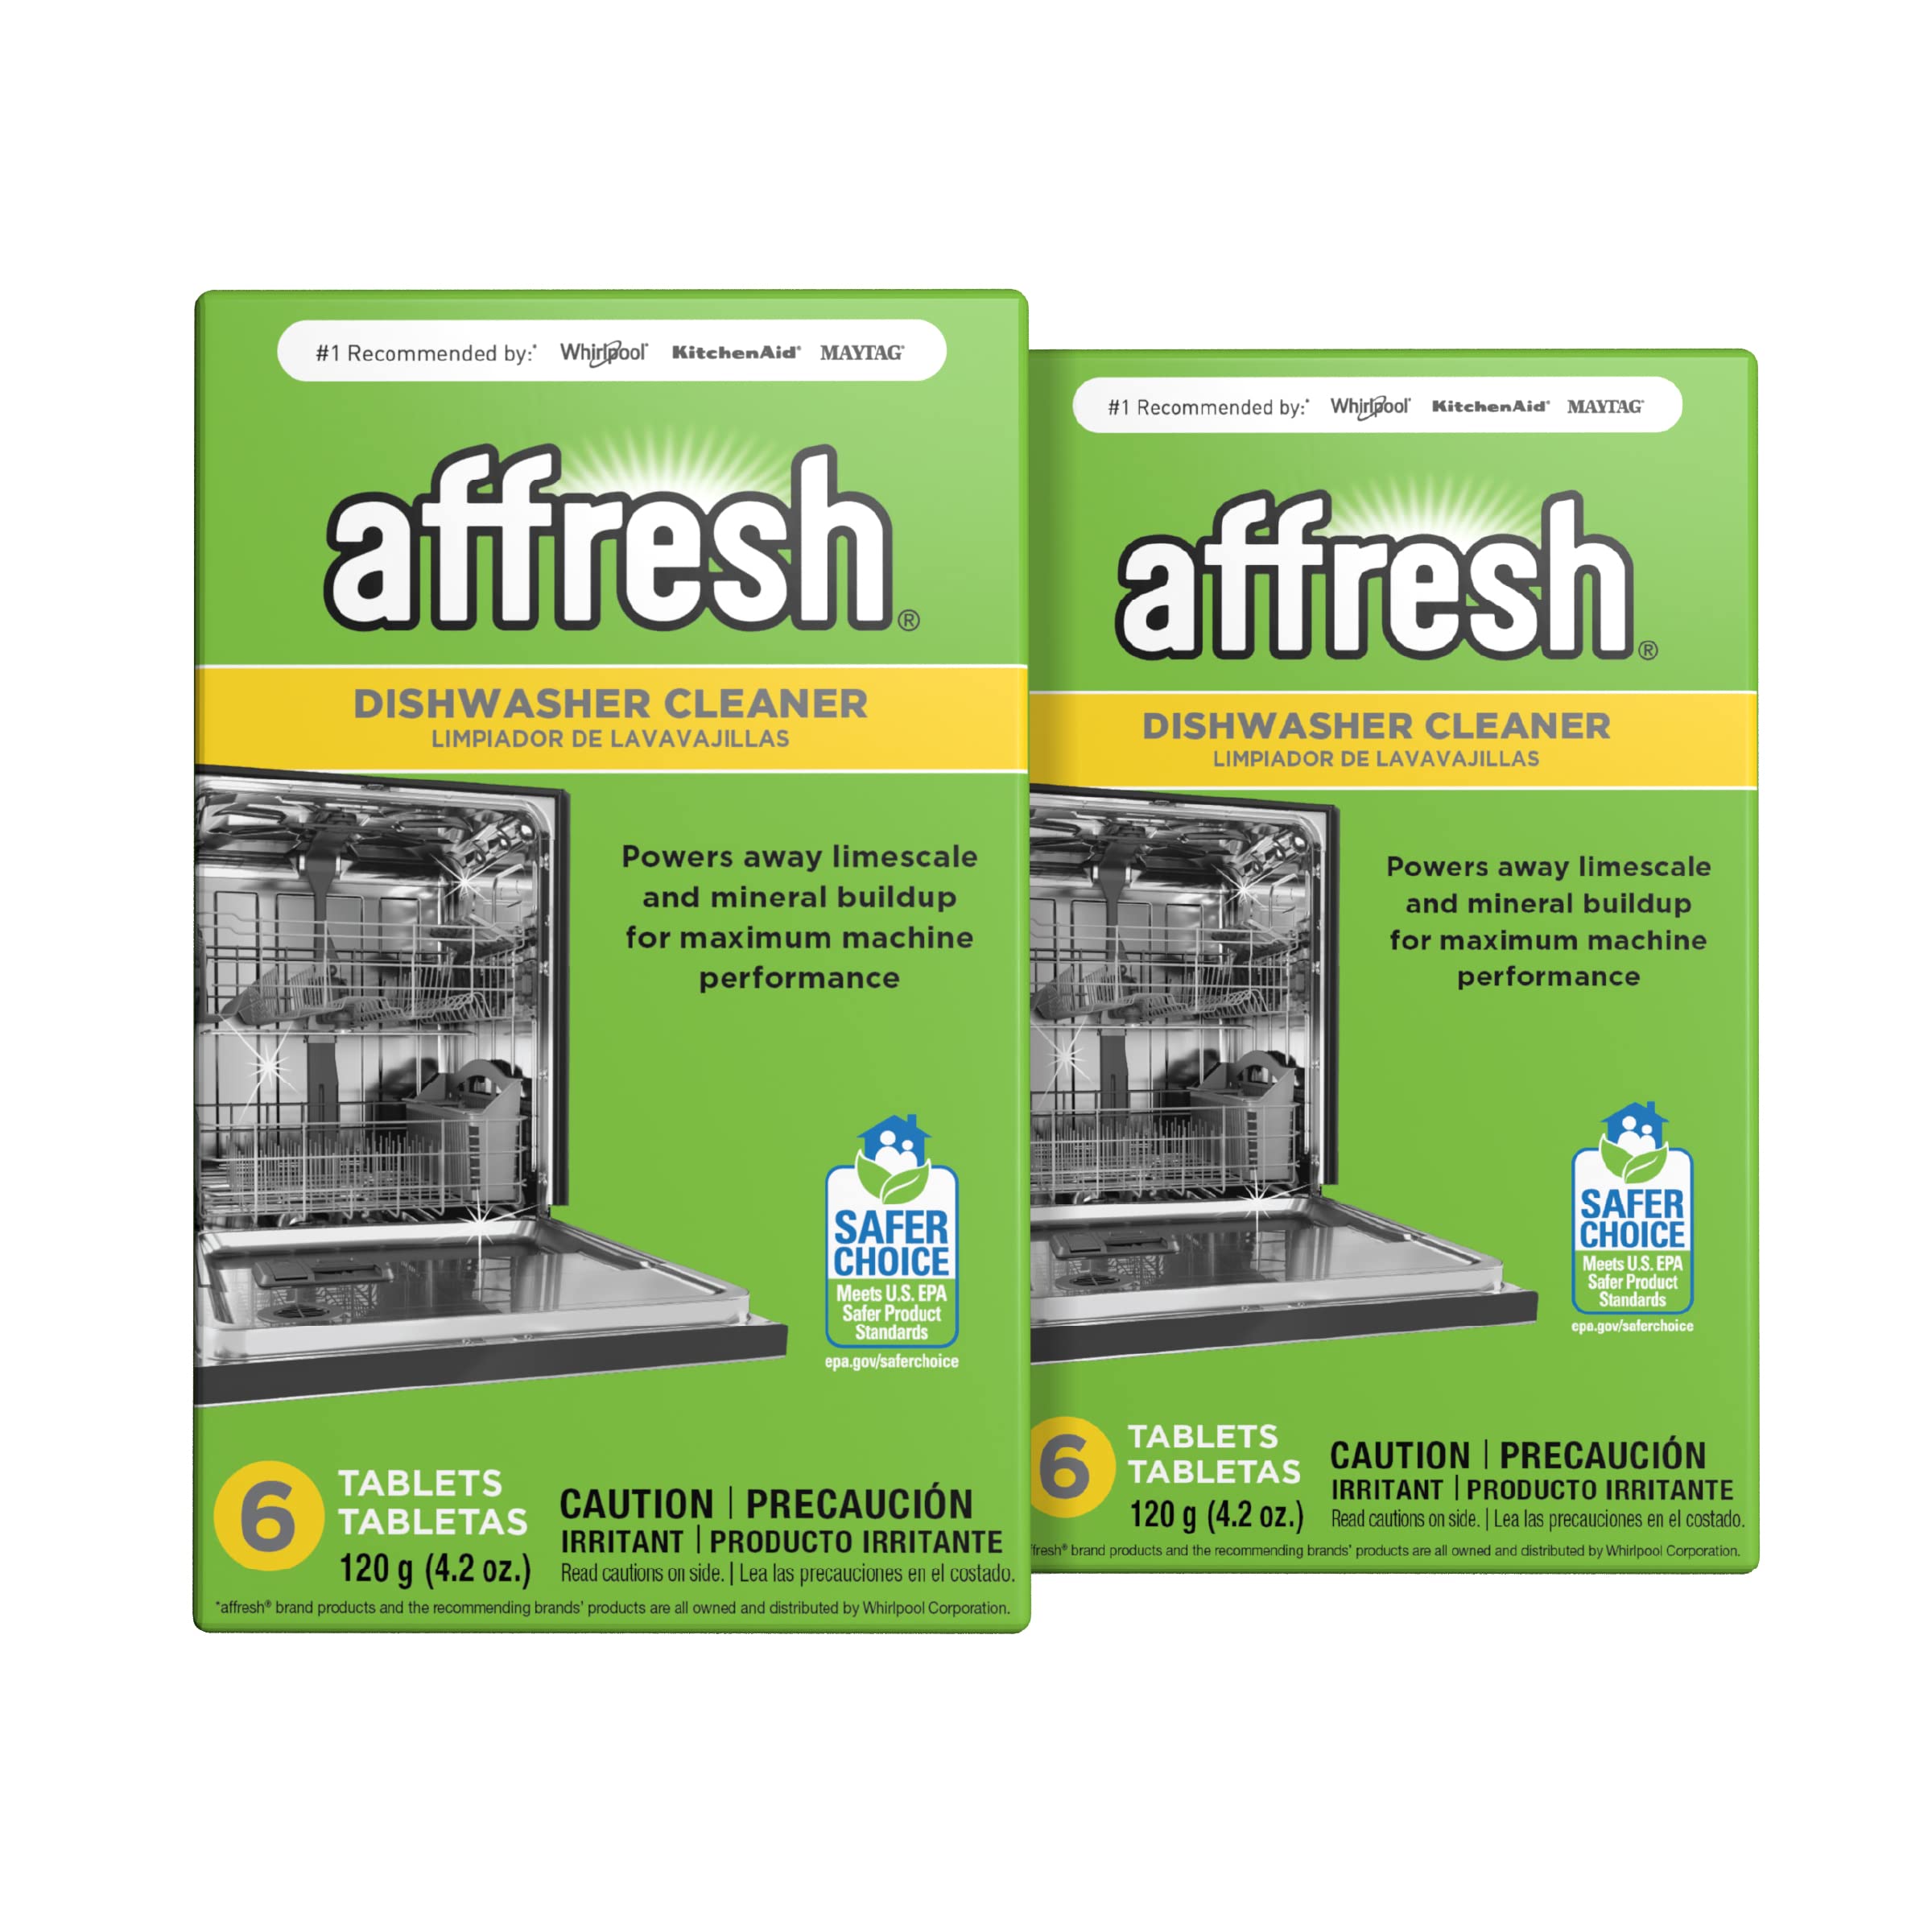 Affresh Garbage Disposal Cleaner, Removes Odor-Causing Residues, 3 Tablets & Dishwasher Cleaner, Helps Remove Limescale and Odor-Causing Residue, 12 Tablets (2 Pack)